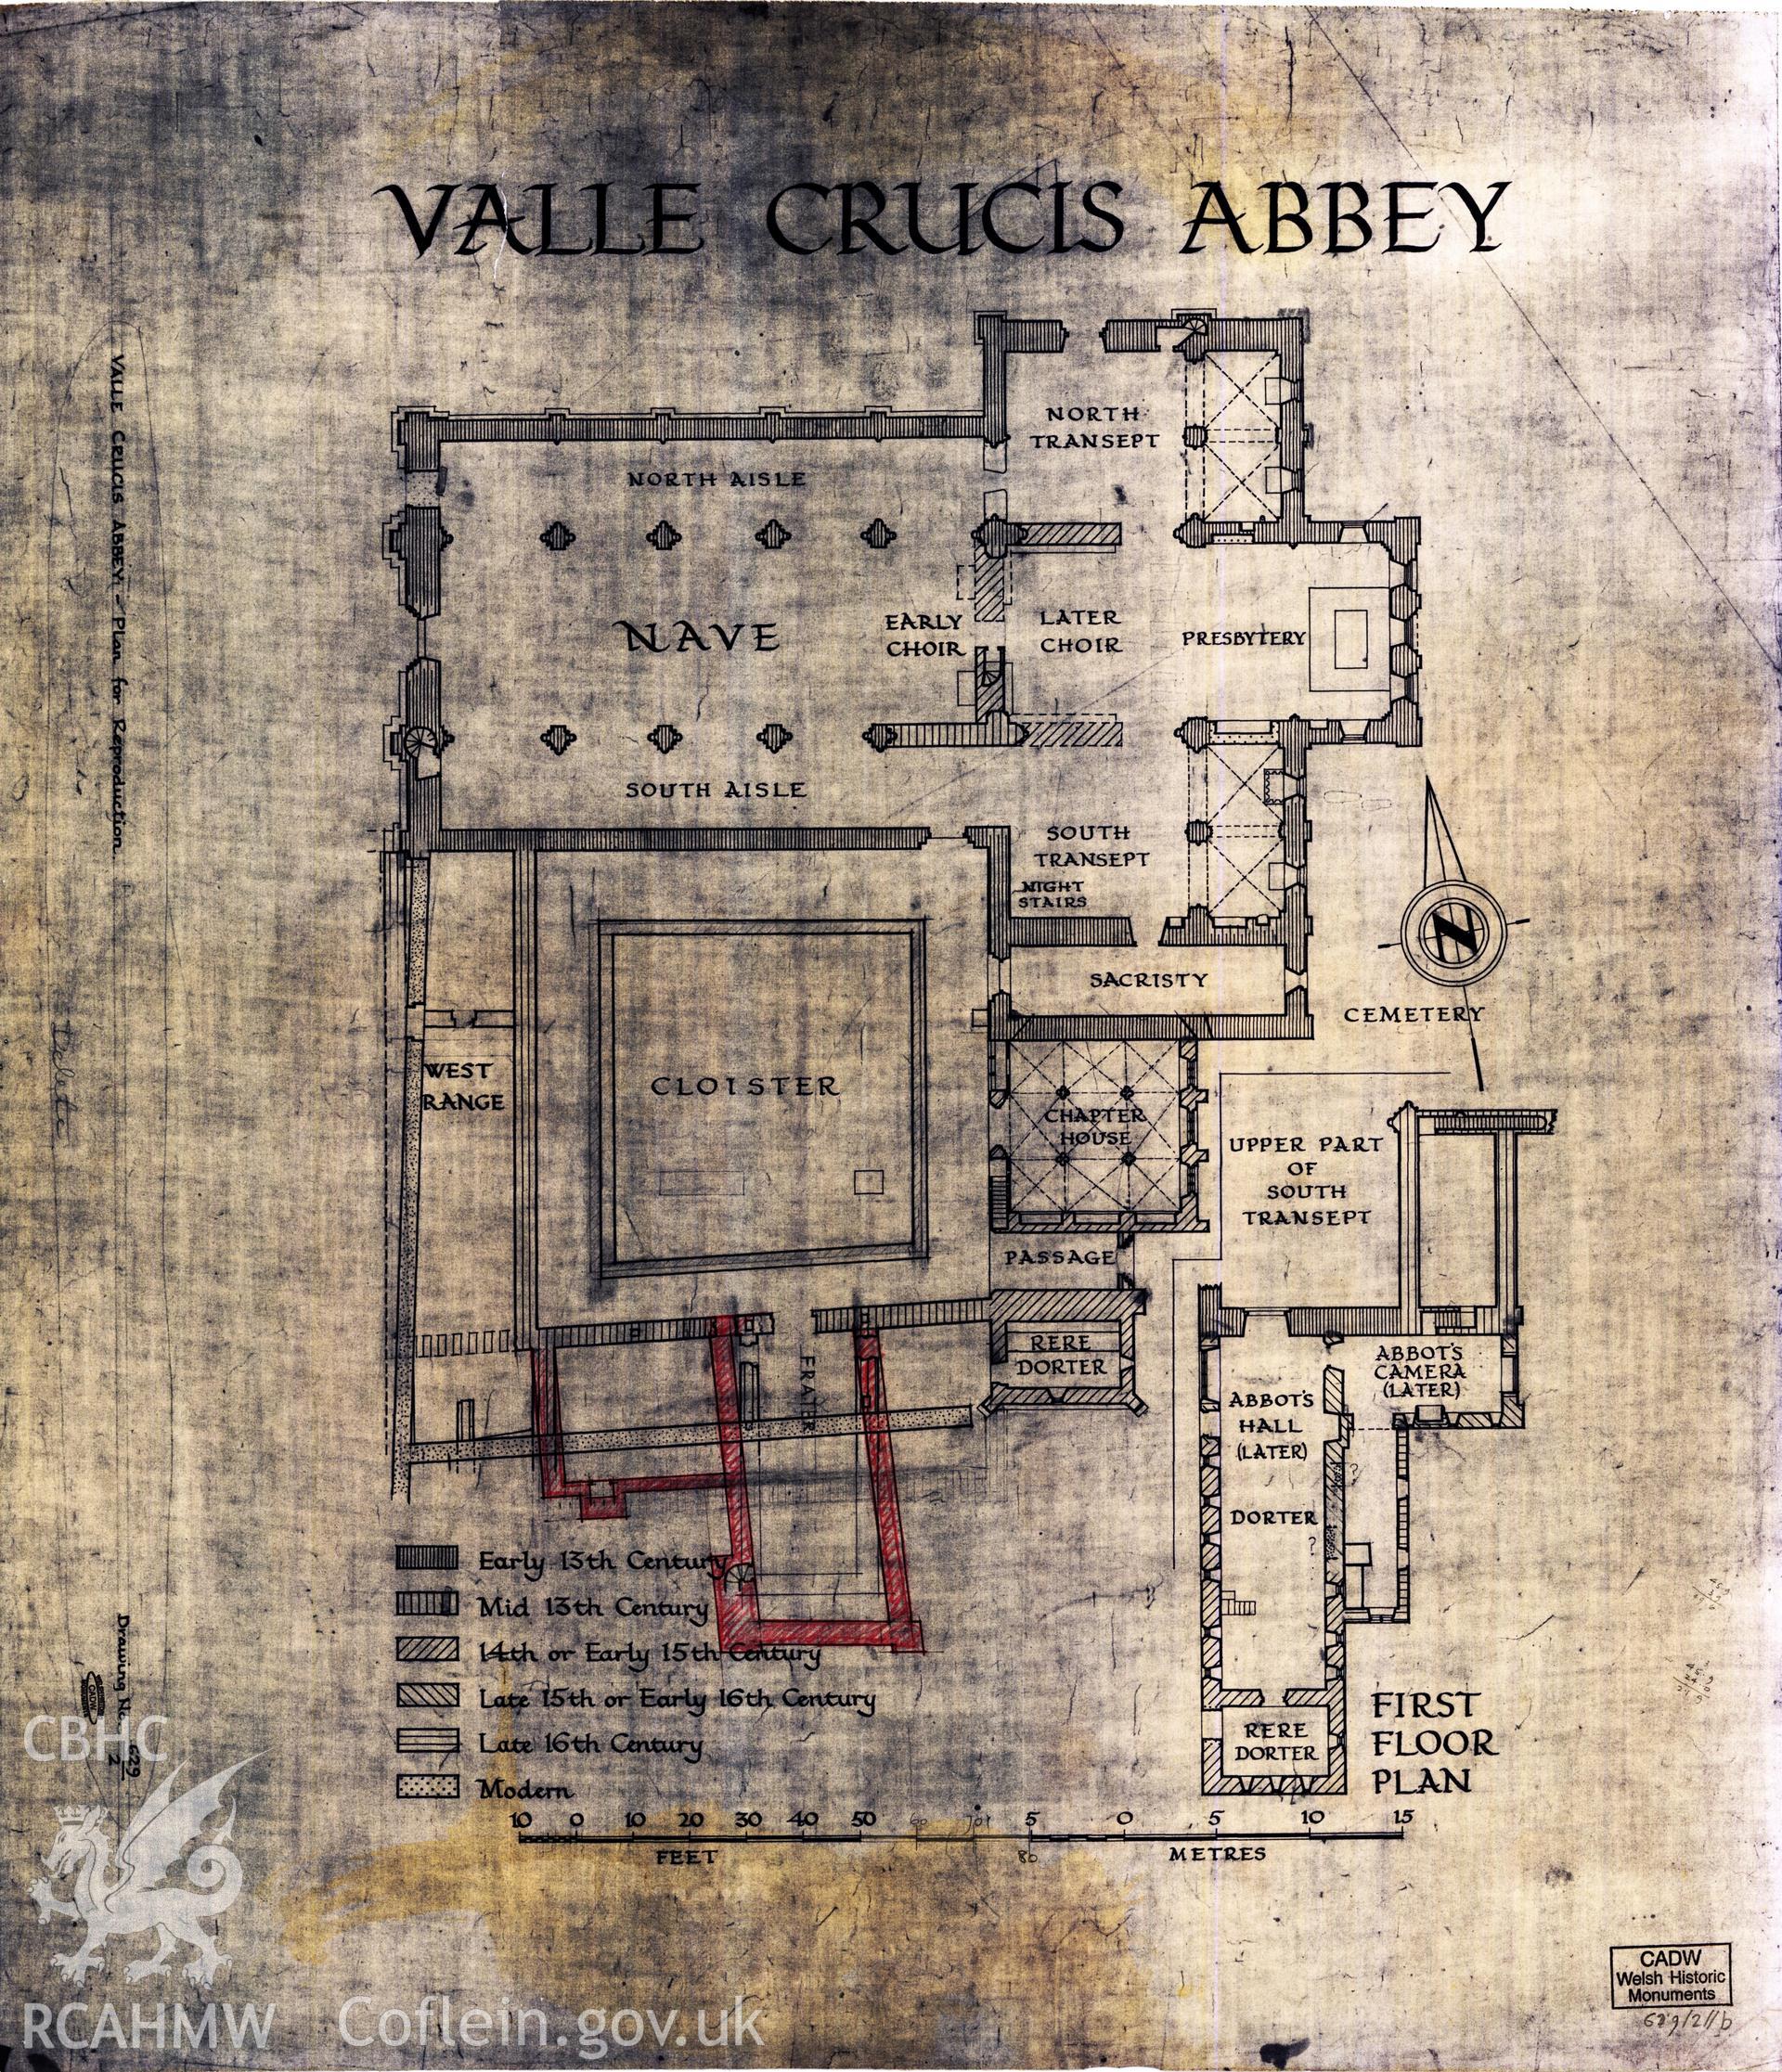 Cadw guardianship monument drawing of Valle Crucis Abbey. Plan with excavated frater. Cadw Ref. No:629/2//b. Scale 1:130.